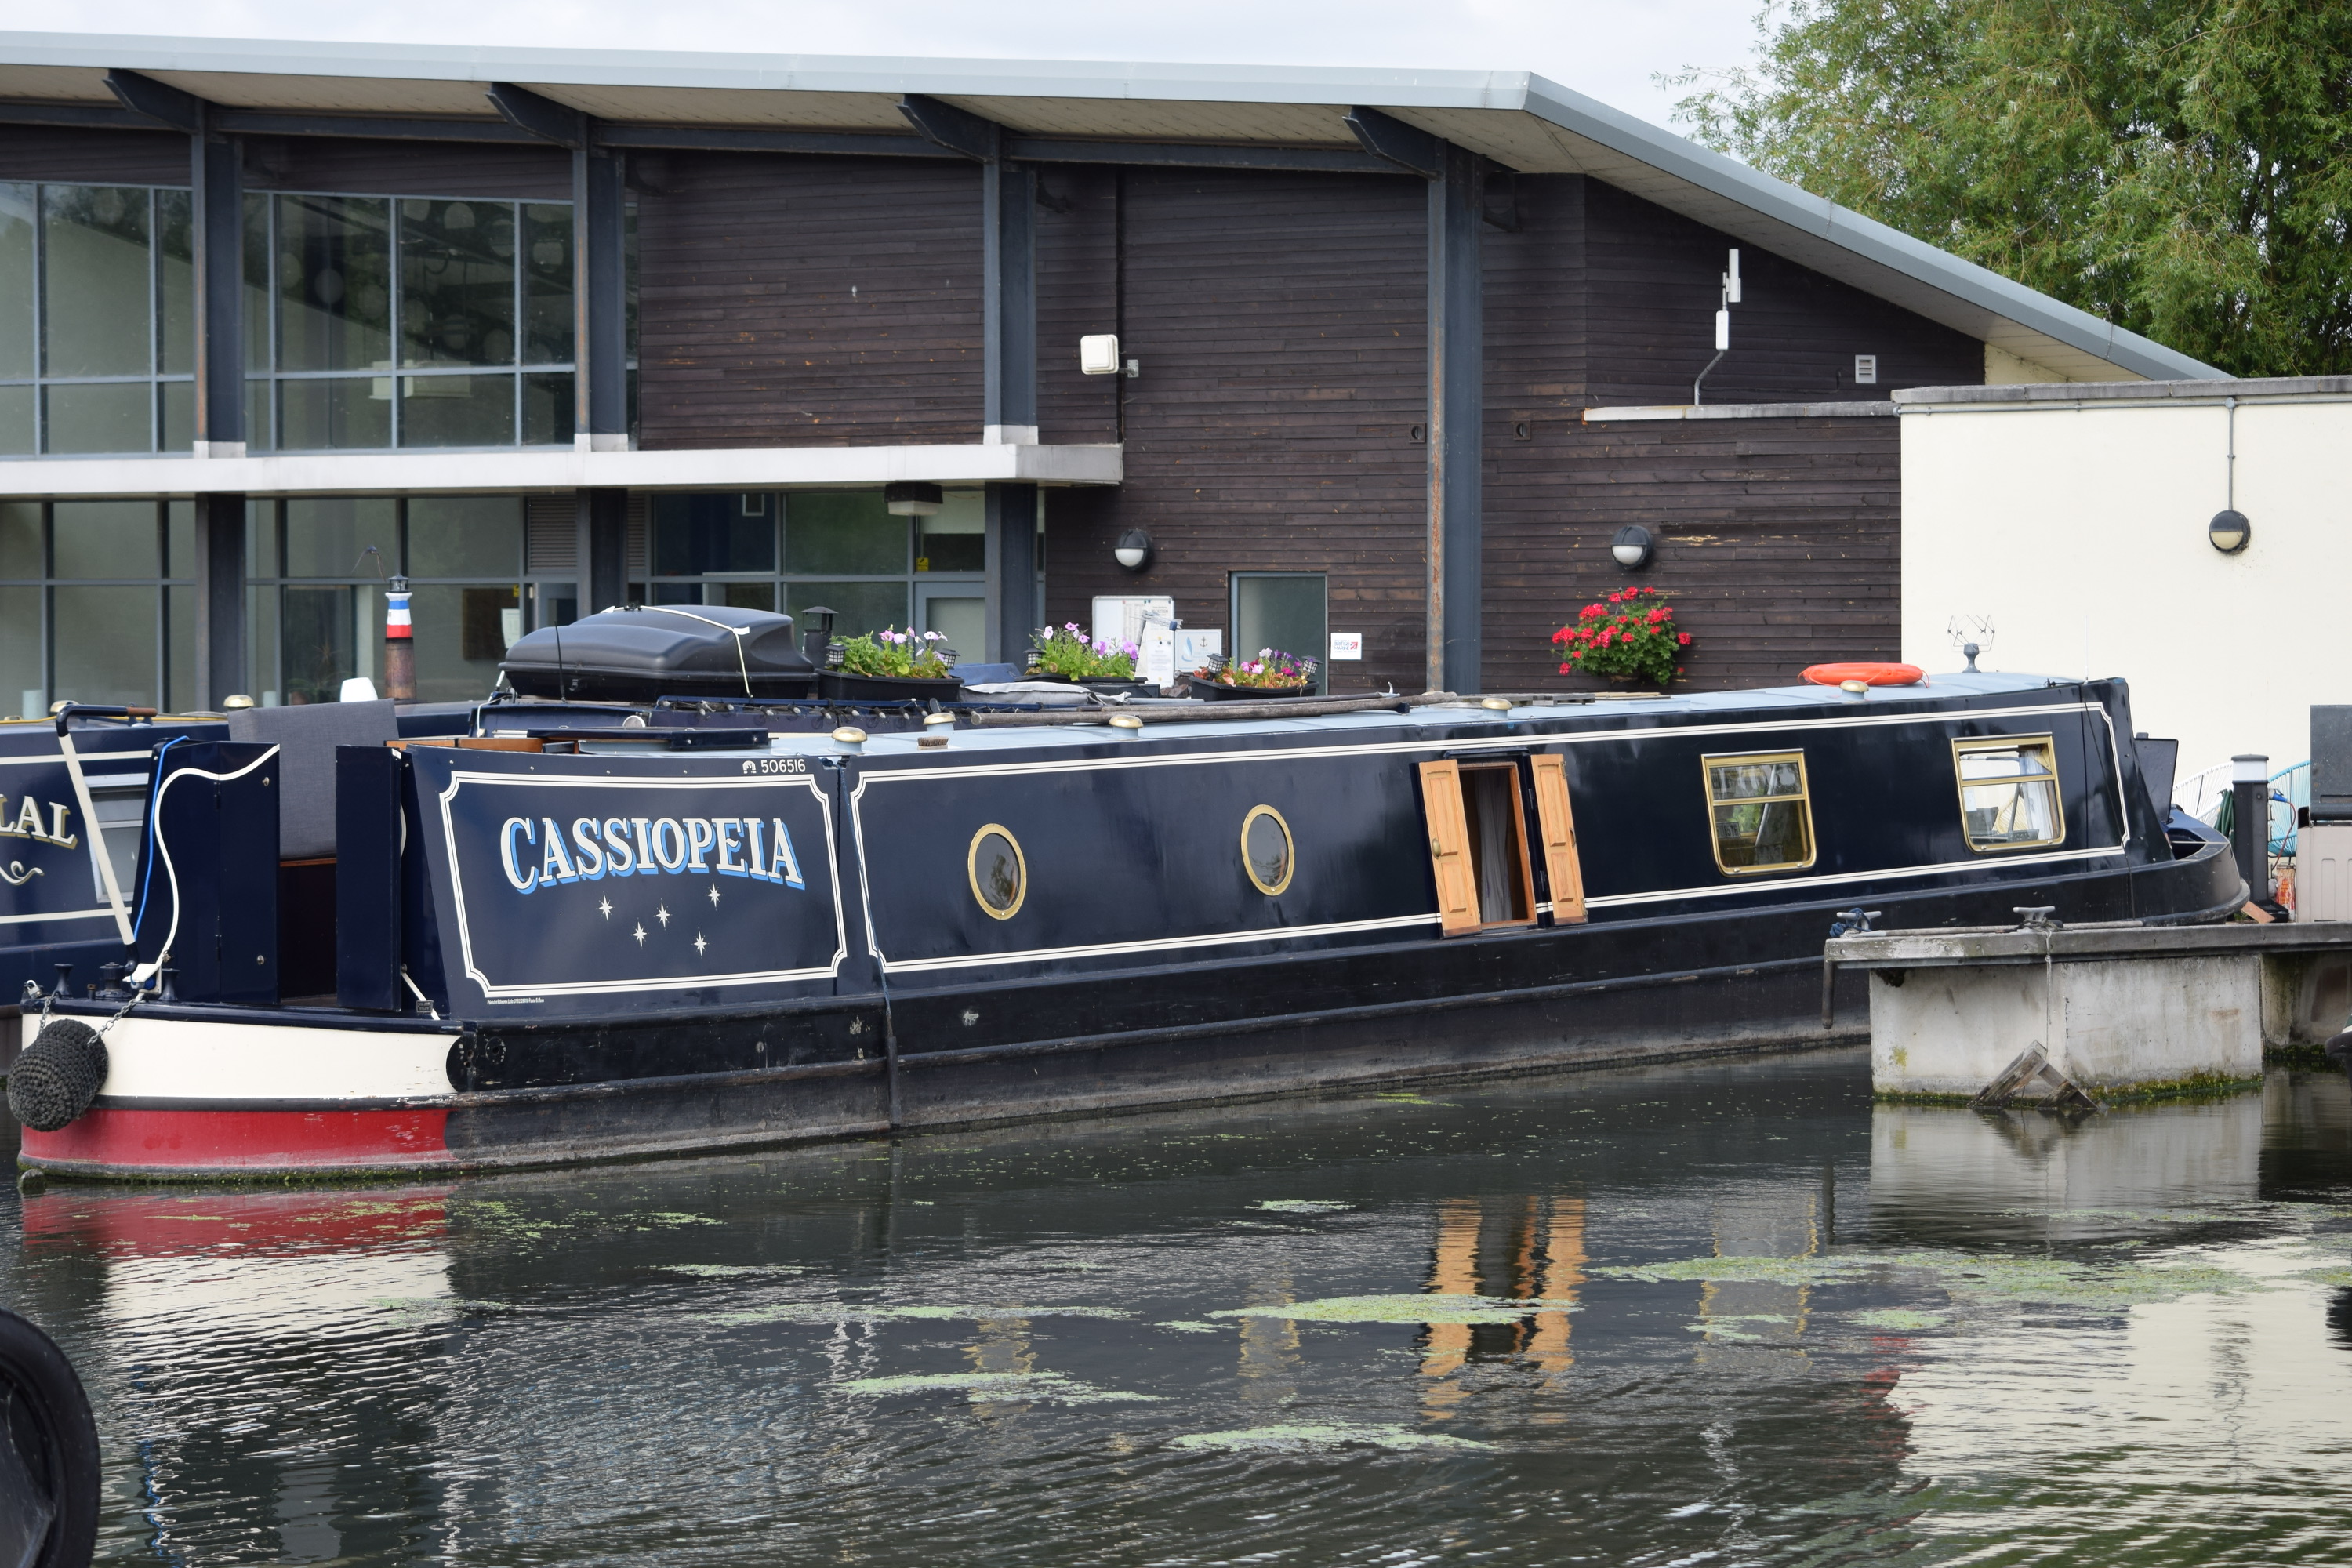 The SN-Cassiopeia class canal boat